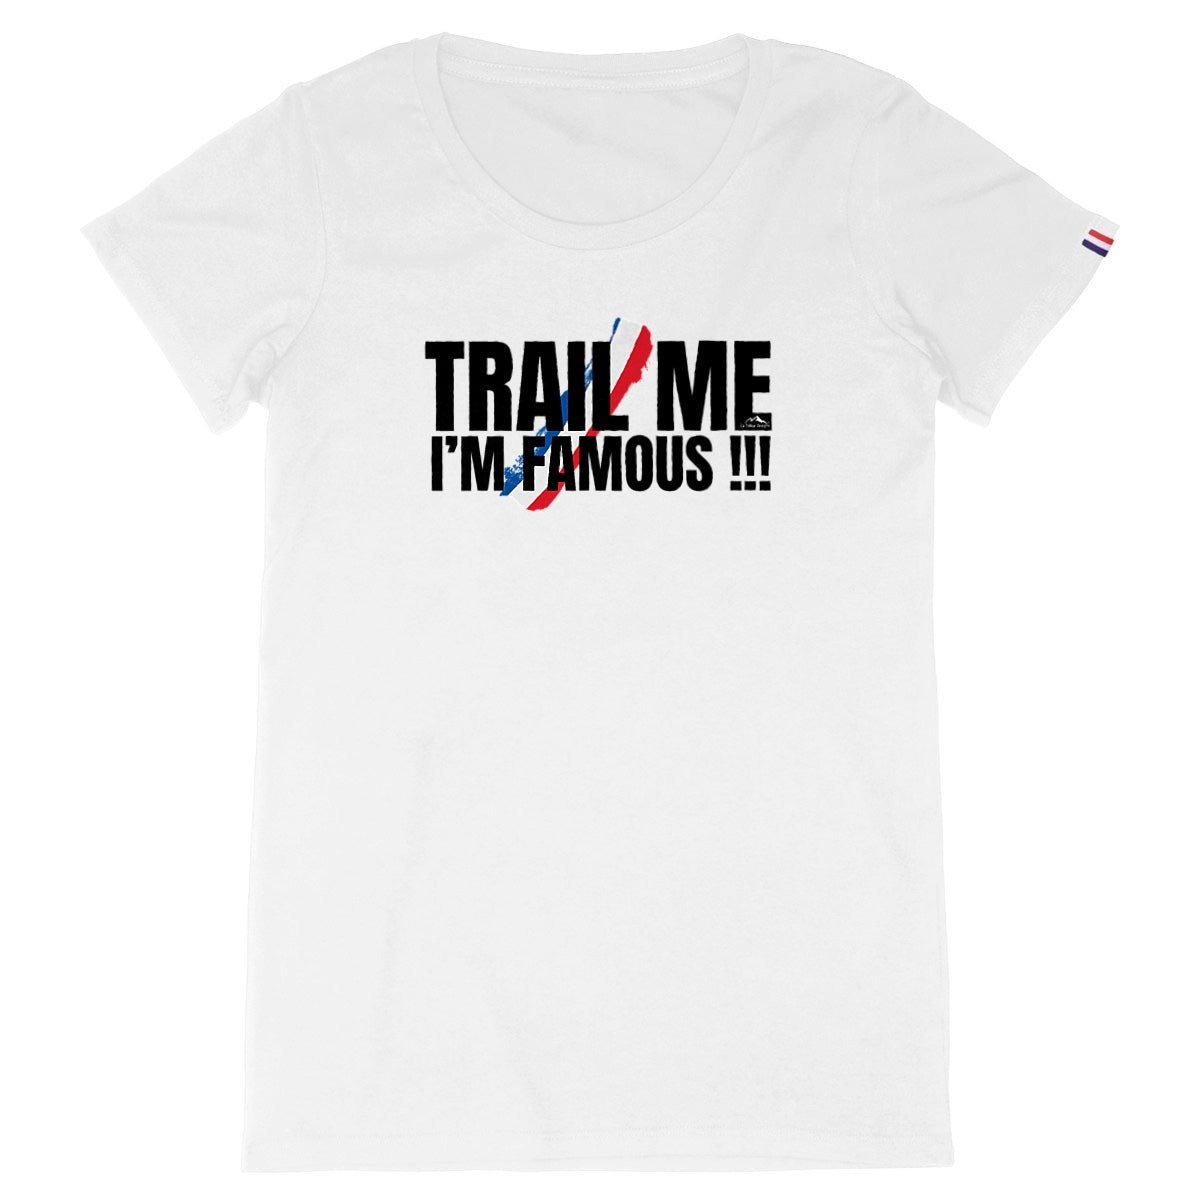 T-Shirt Coton Bio - 🇫🇷Made in France🇫🇷 - Femme - Collection "Trail Me, I'm Famous !!!"(1730) - Le Traileur Anonyme